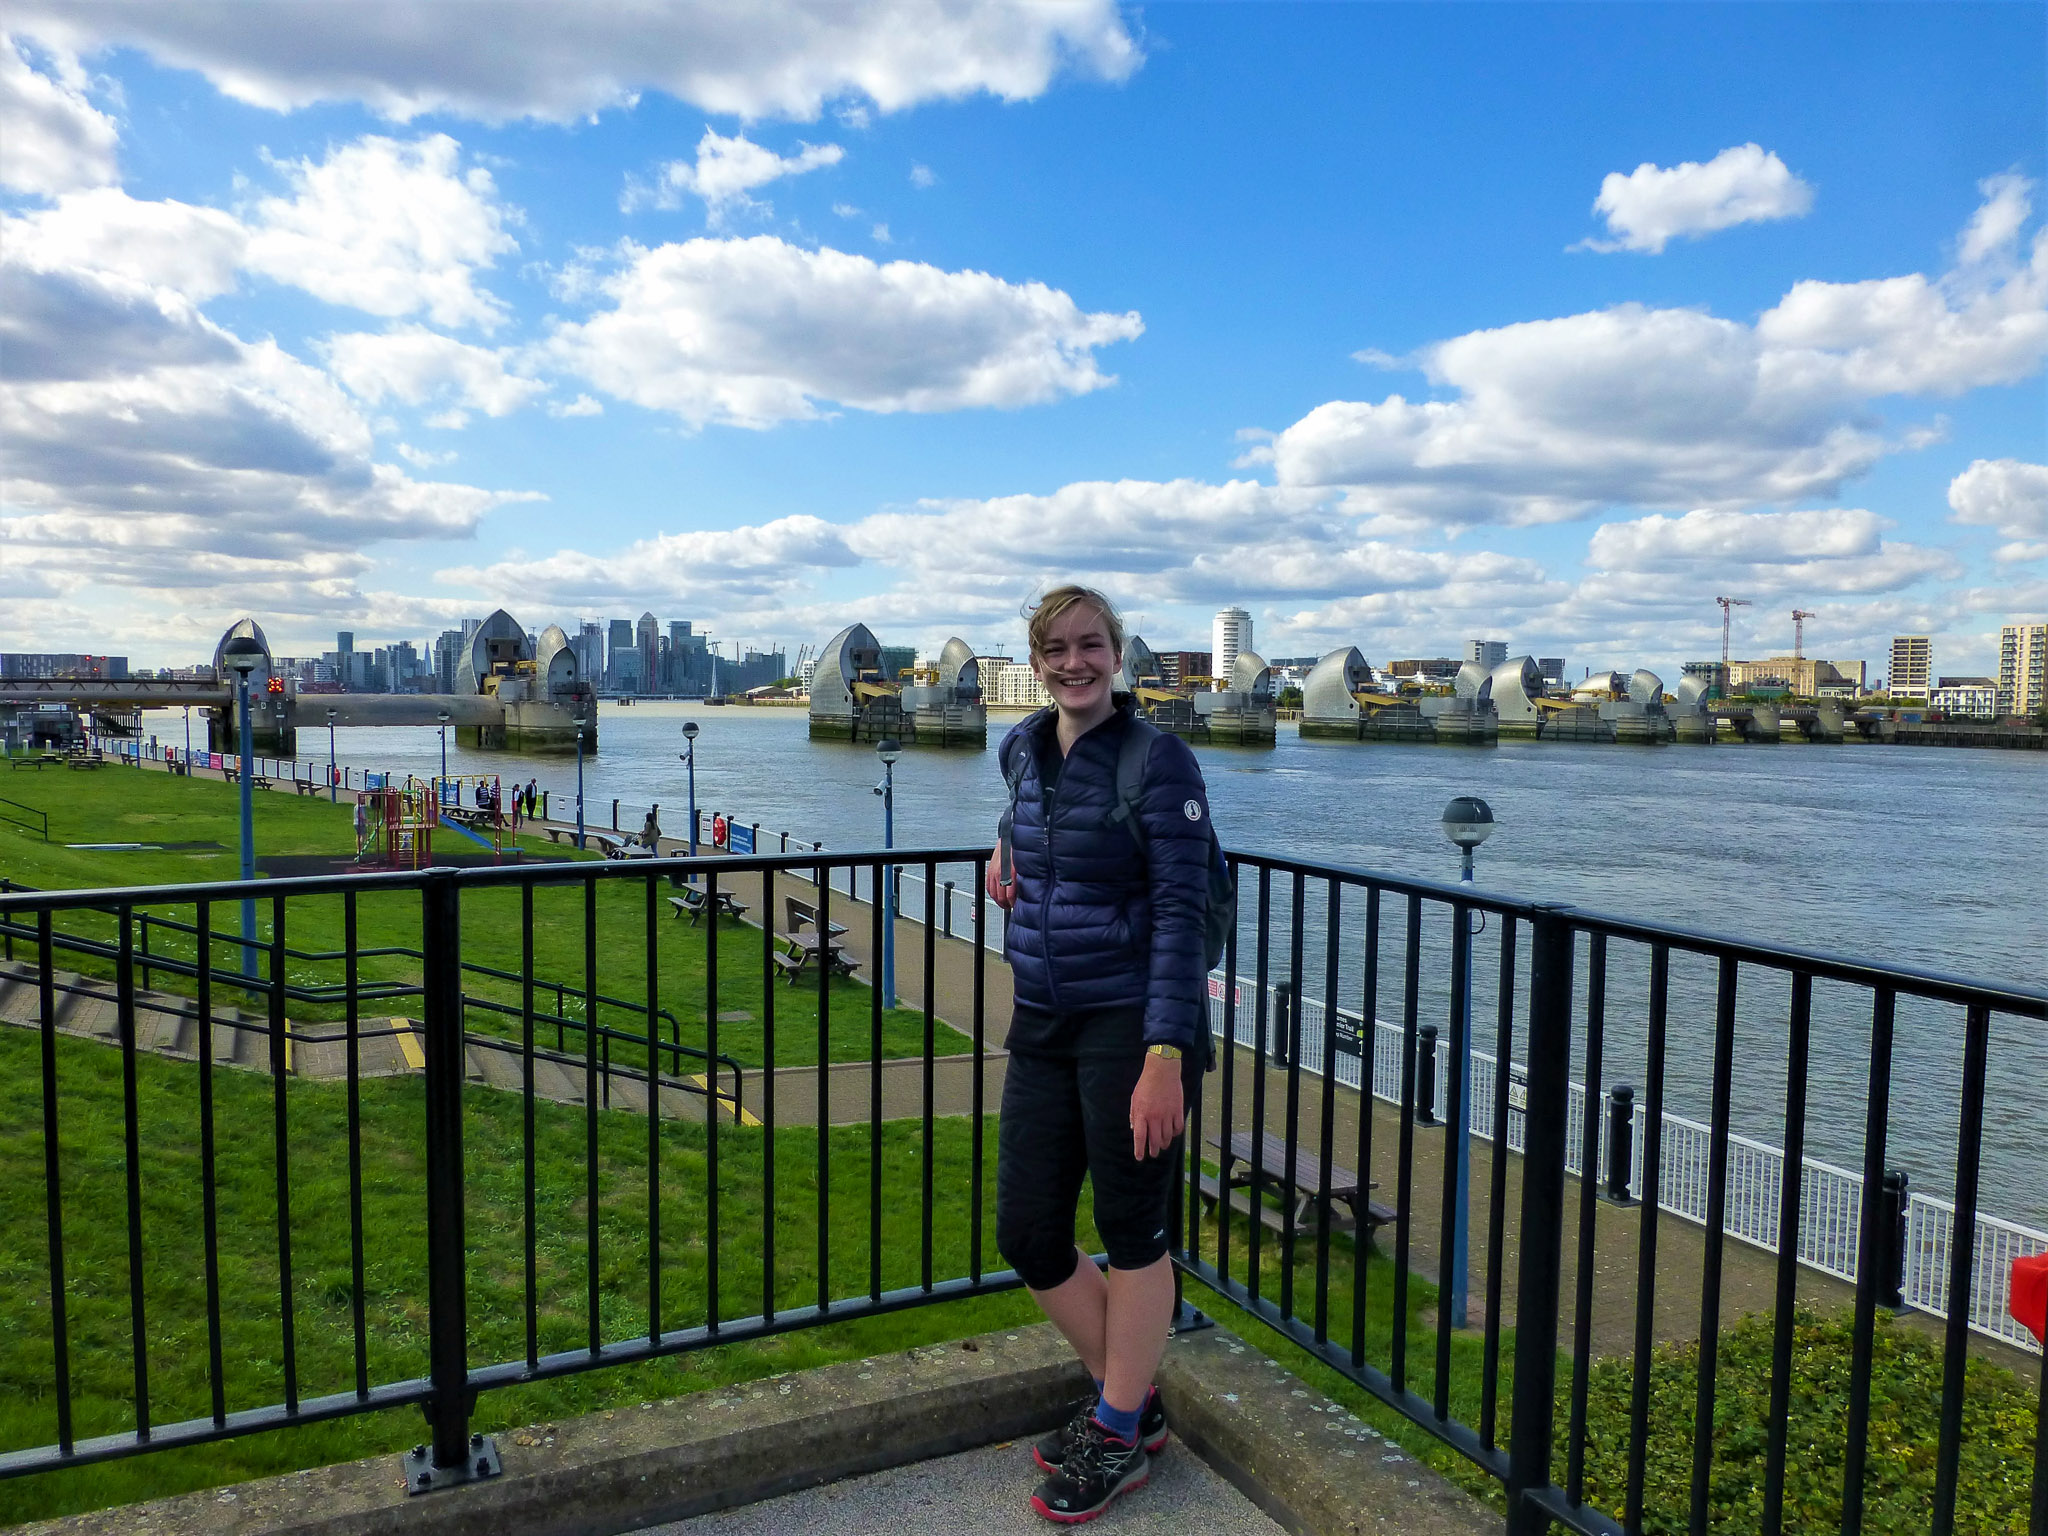 Pippa from the Absolute Escapes Team at the Thames Barrier